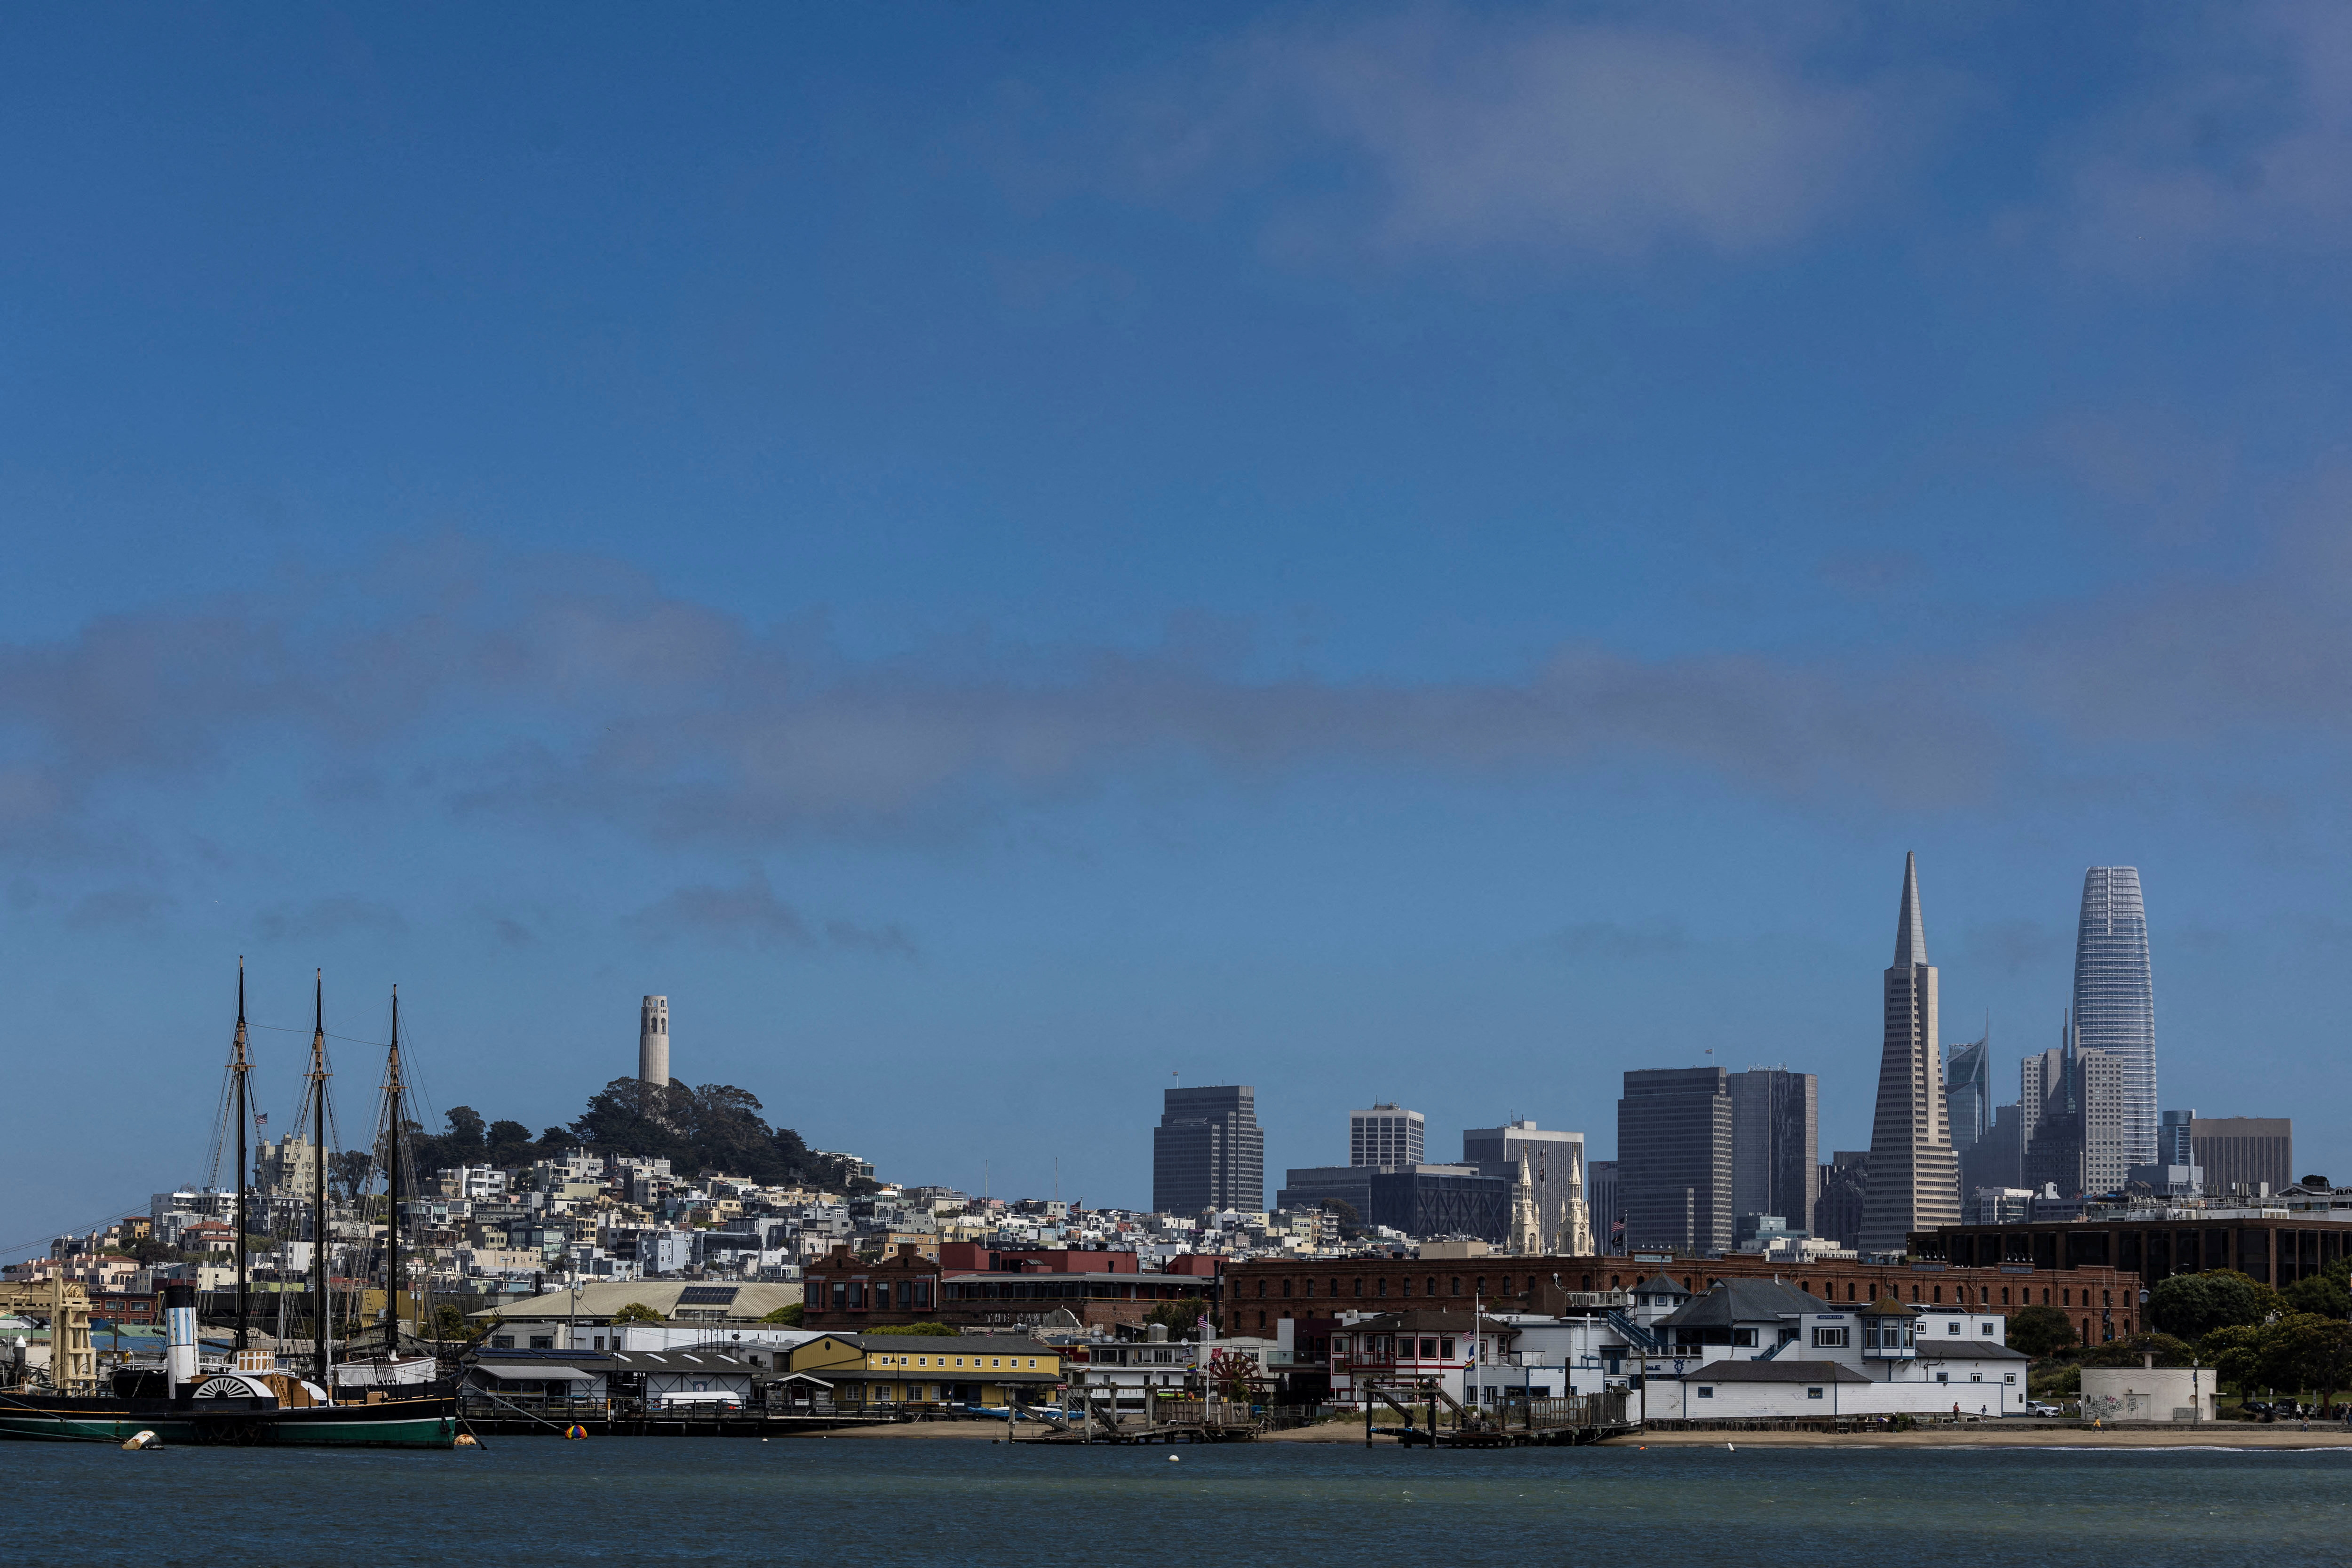 A view shows the downtown skyline of San Francisco